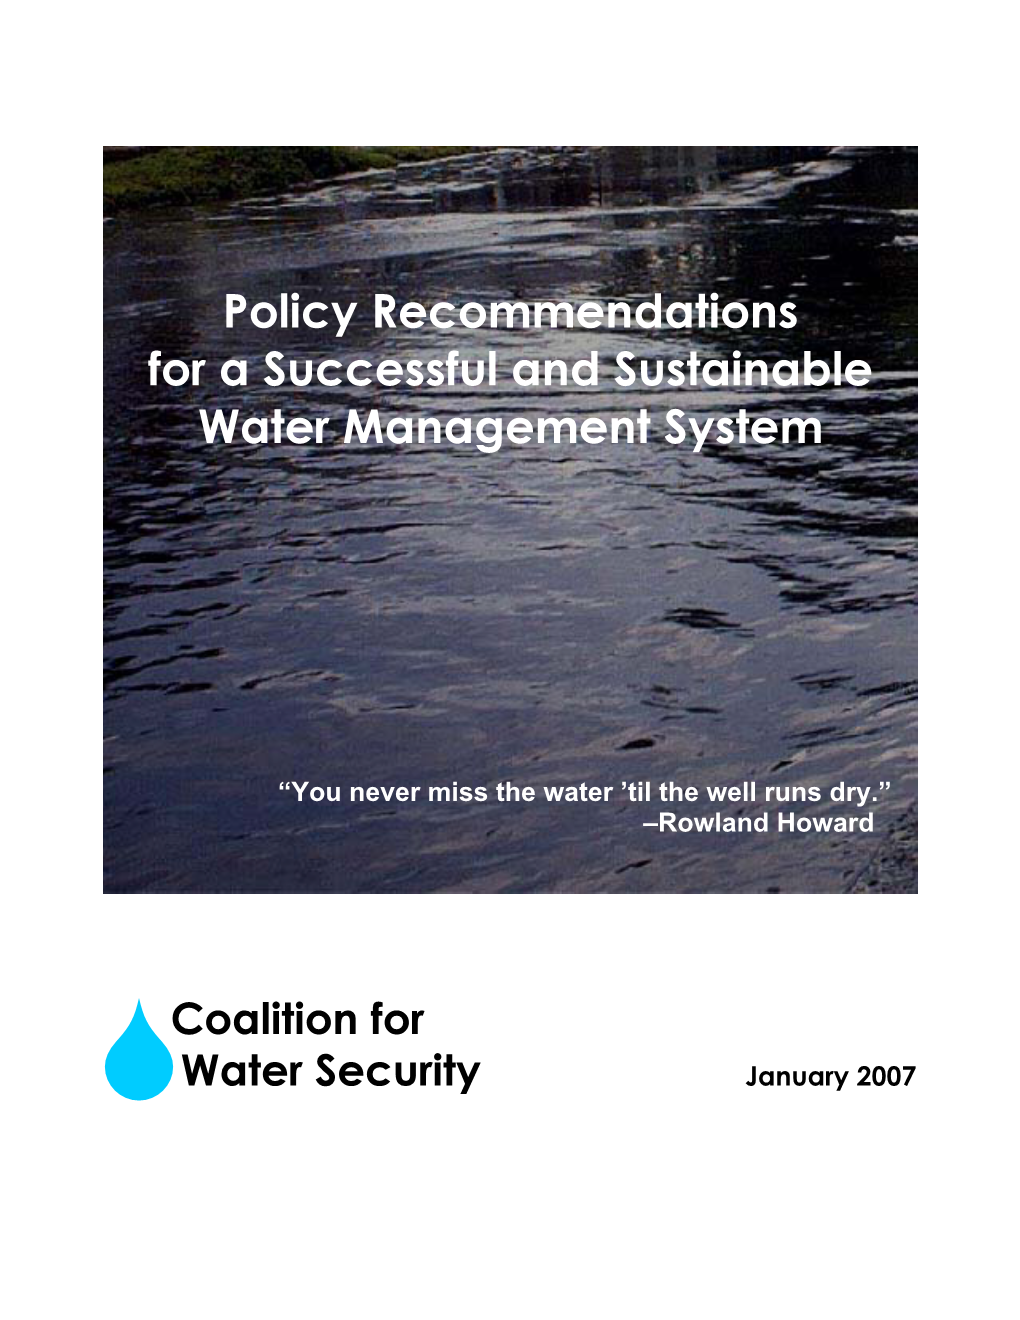 Policy Recommendations for a Successful and Sustainable Water Management System Page 1